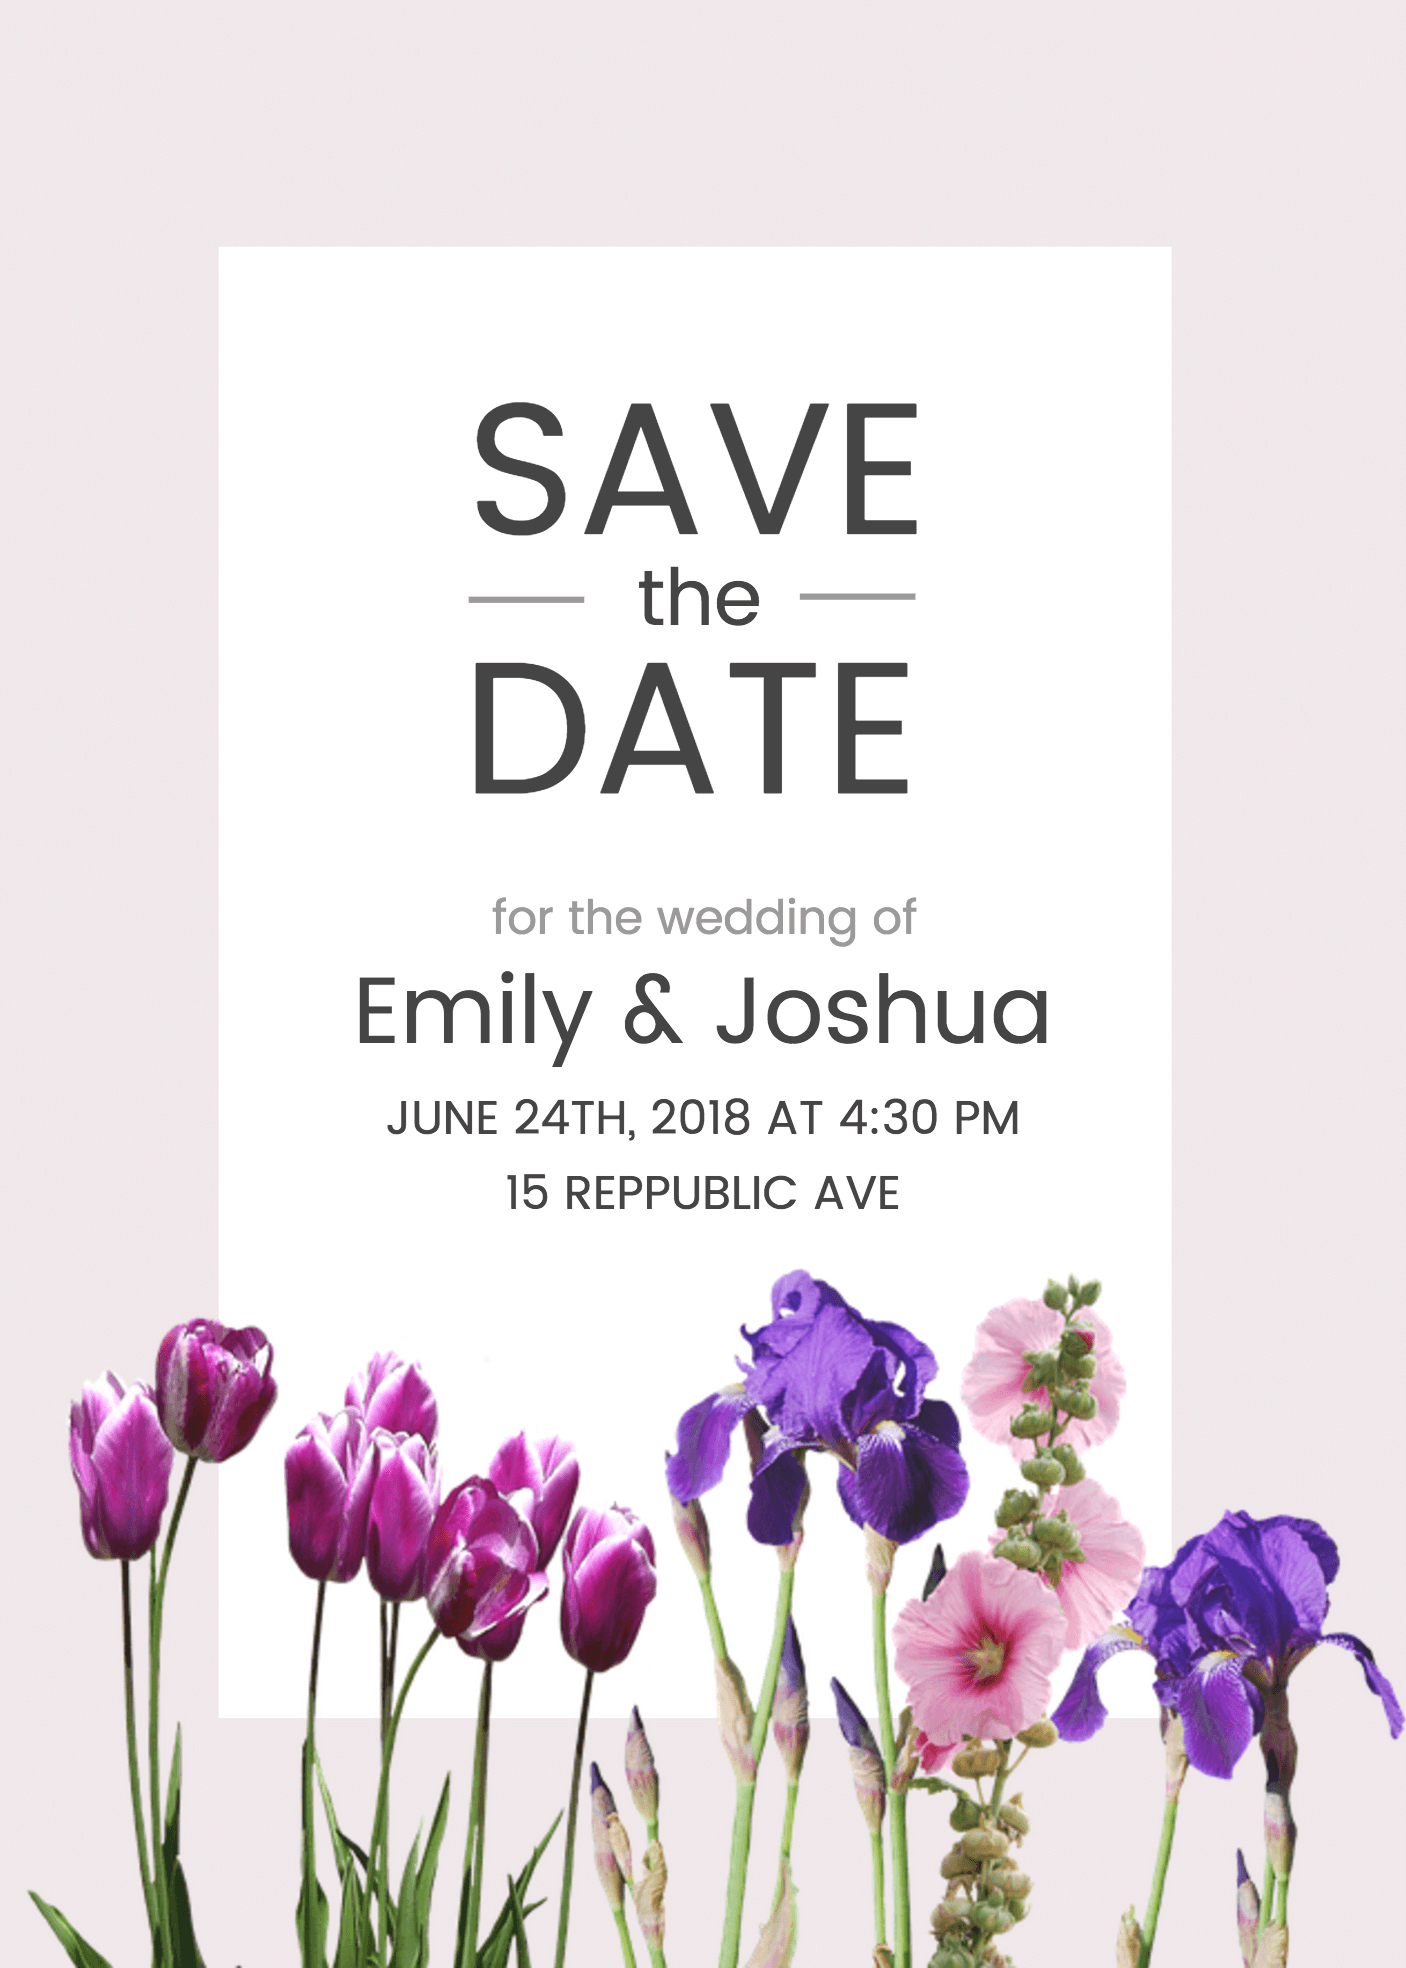 Floral Save The Date Invitation Template Venngage throughout size 1406 X 1968